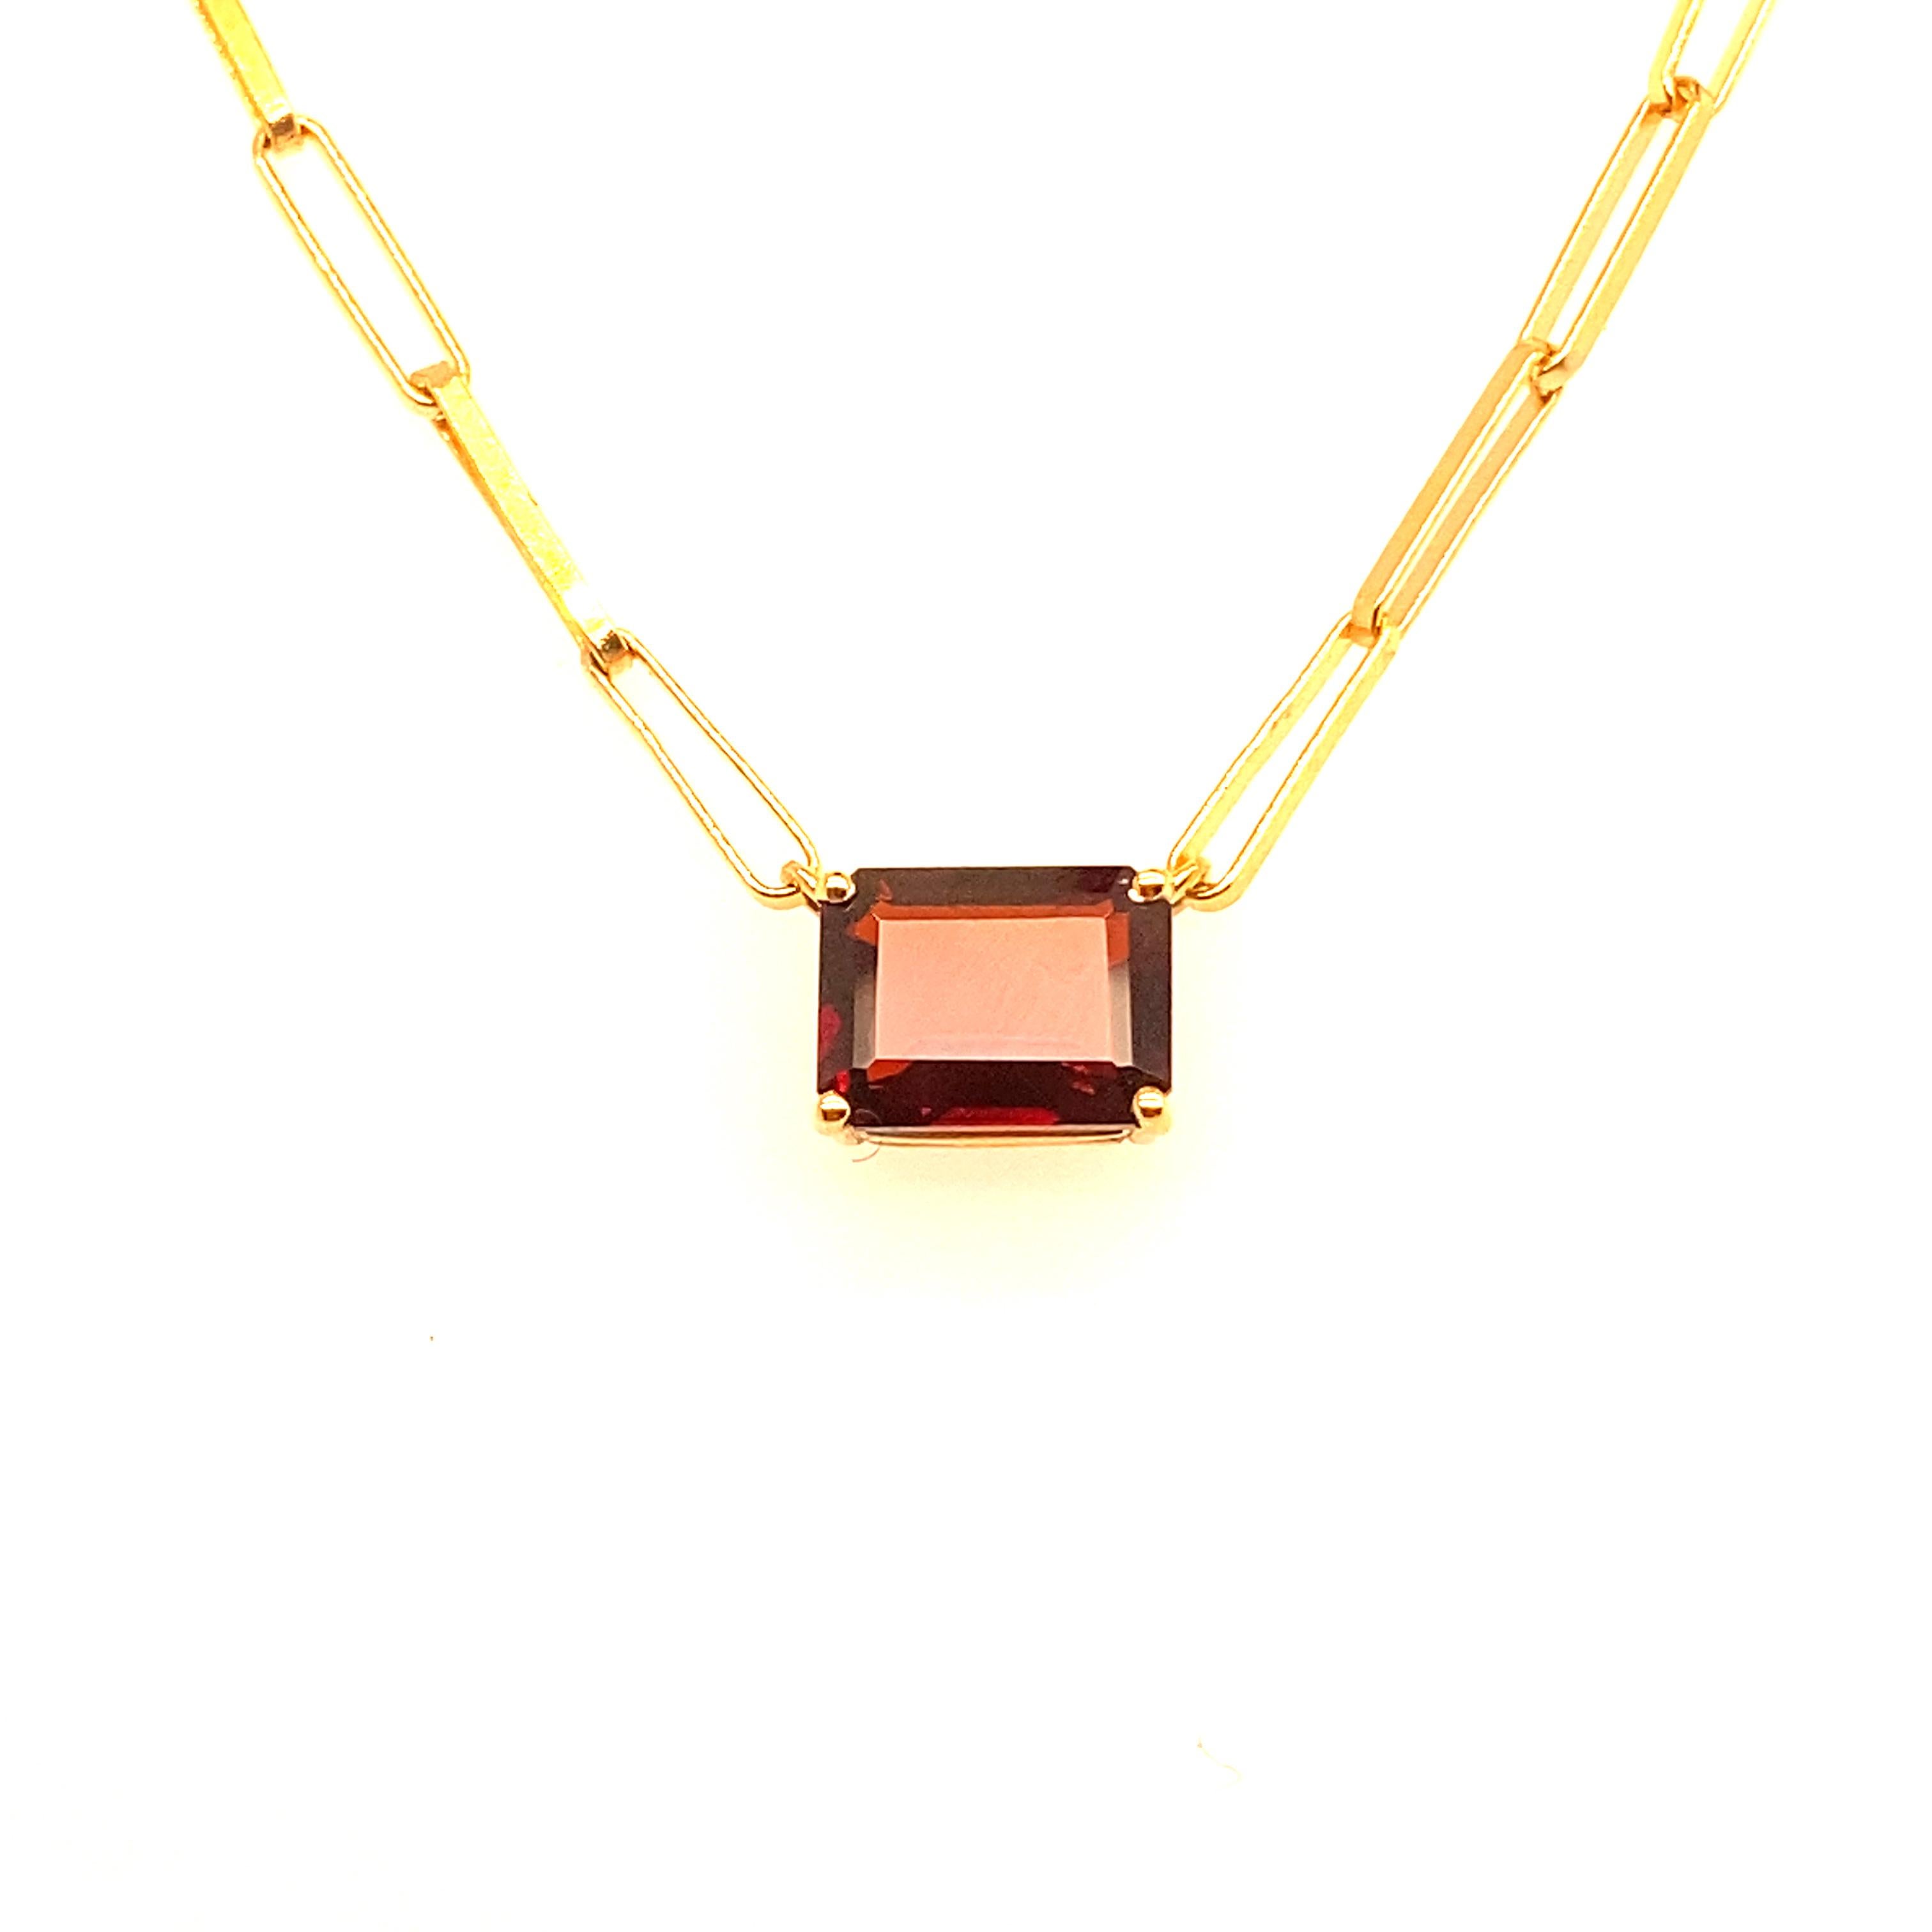 Welcome to our home, where we are delighted to present you with this superb 18-carat yellow gold, straight Mech necklace, adorned with a magnificent RPC-cut garnet and an elegant RPC-cut blue quartz, a harmonious combination of color and